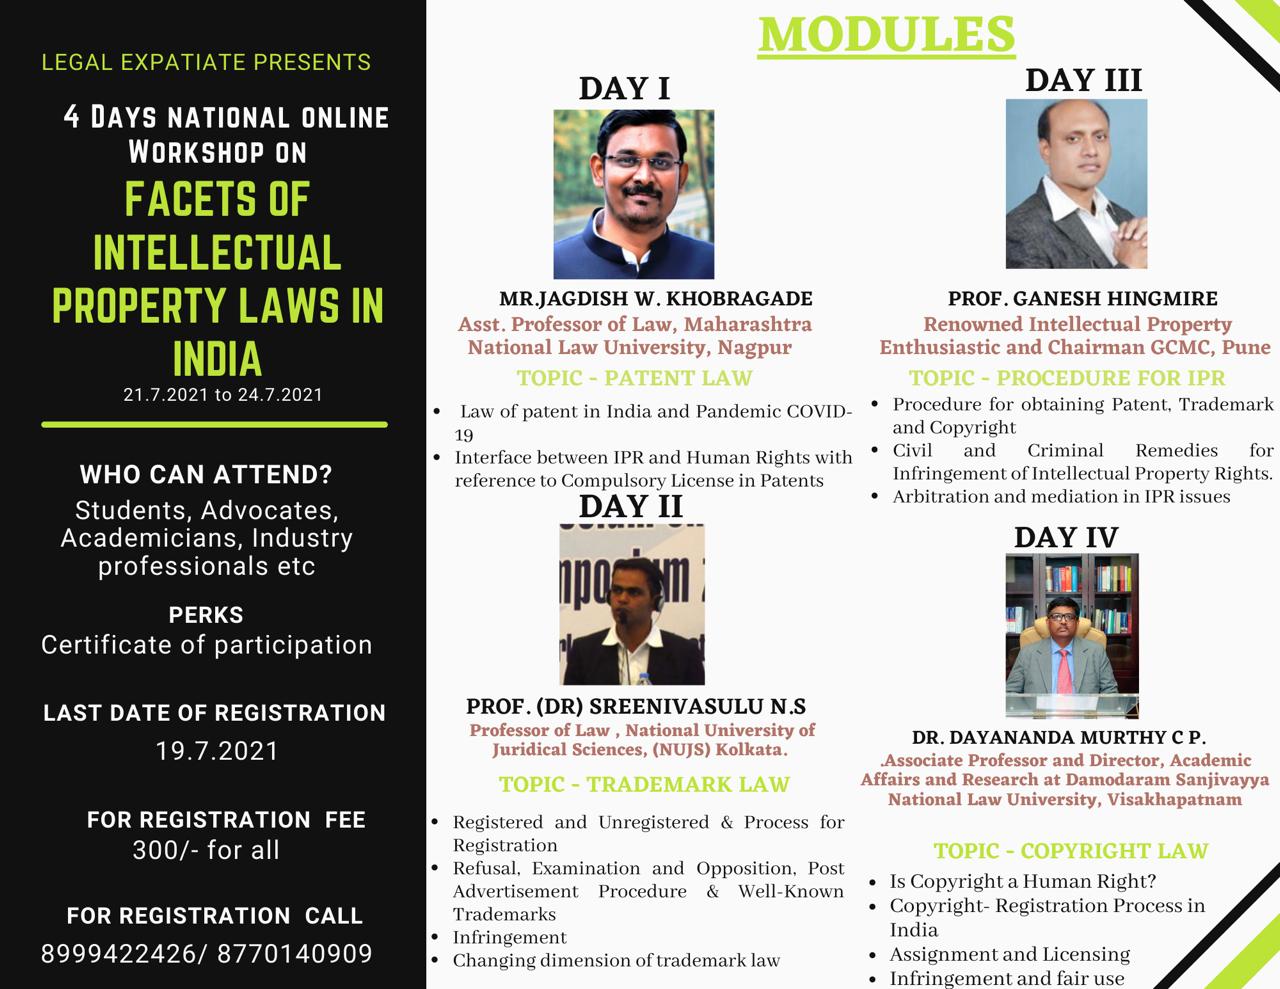 Legal Expatiate: 4 Days Online National Workshop On Facets Of Intellectual Property Laws In India [Register by 19.7.2021]